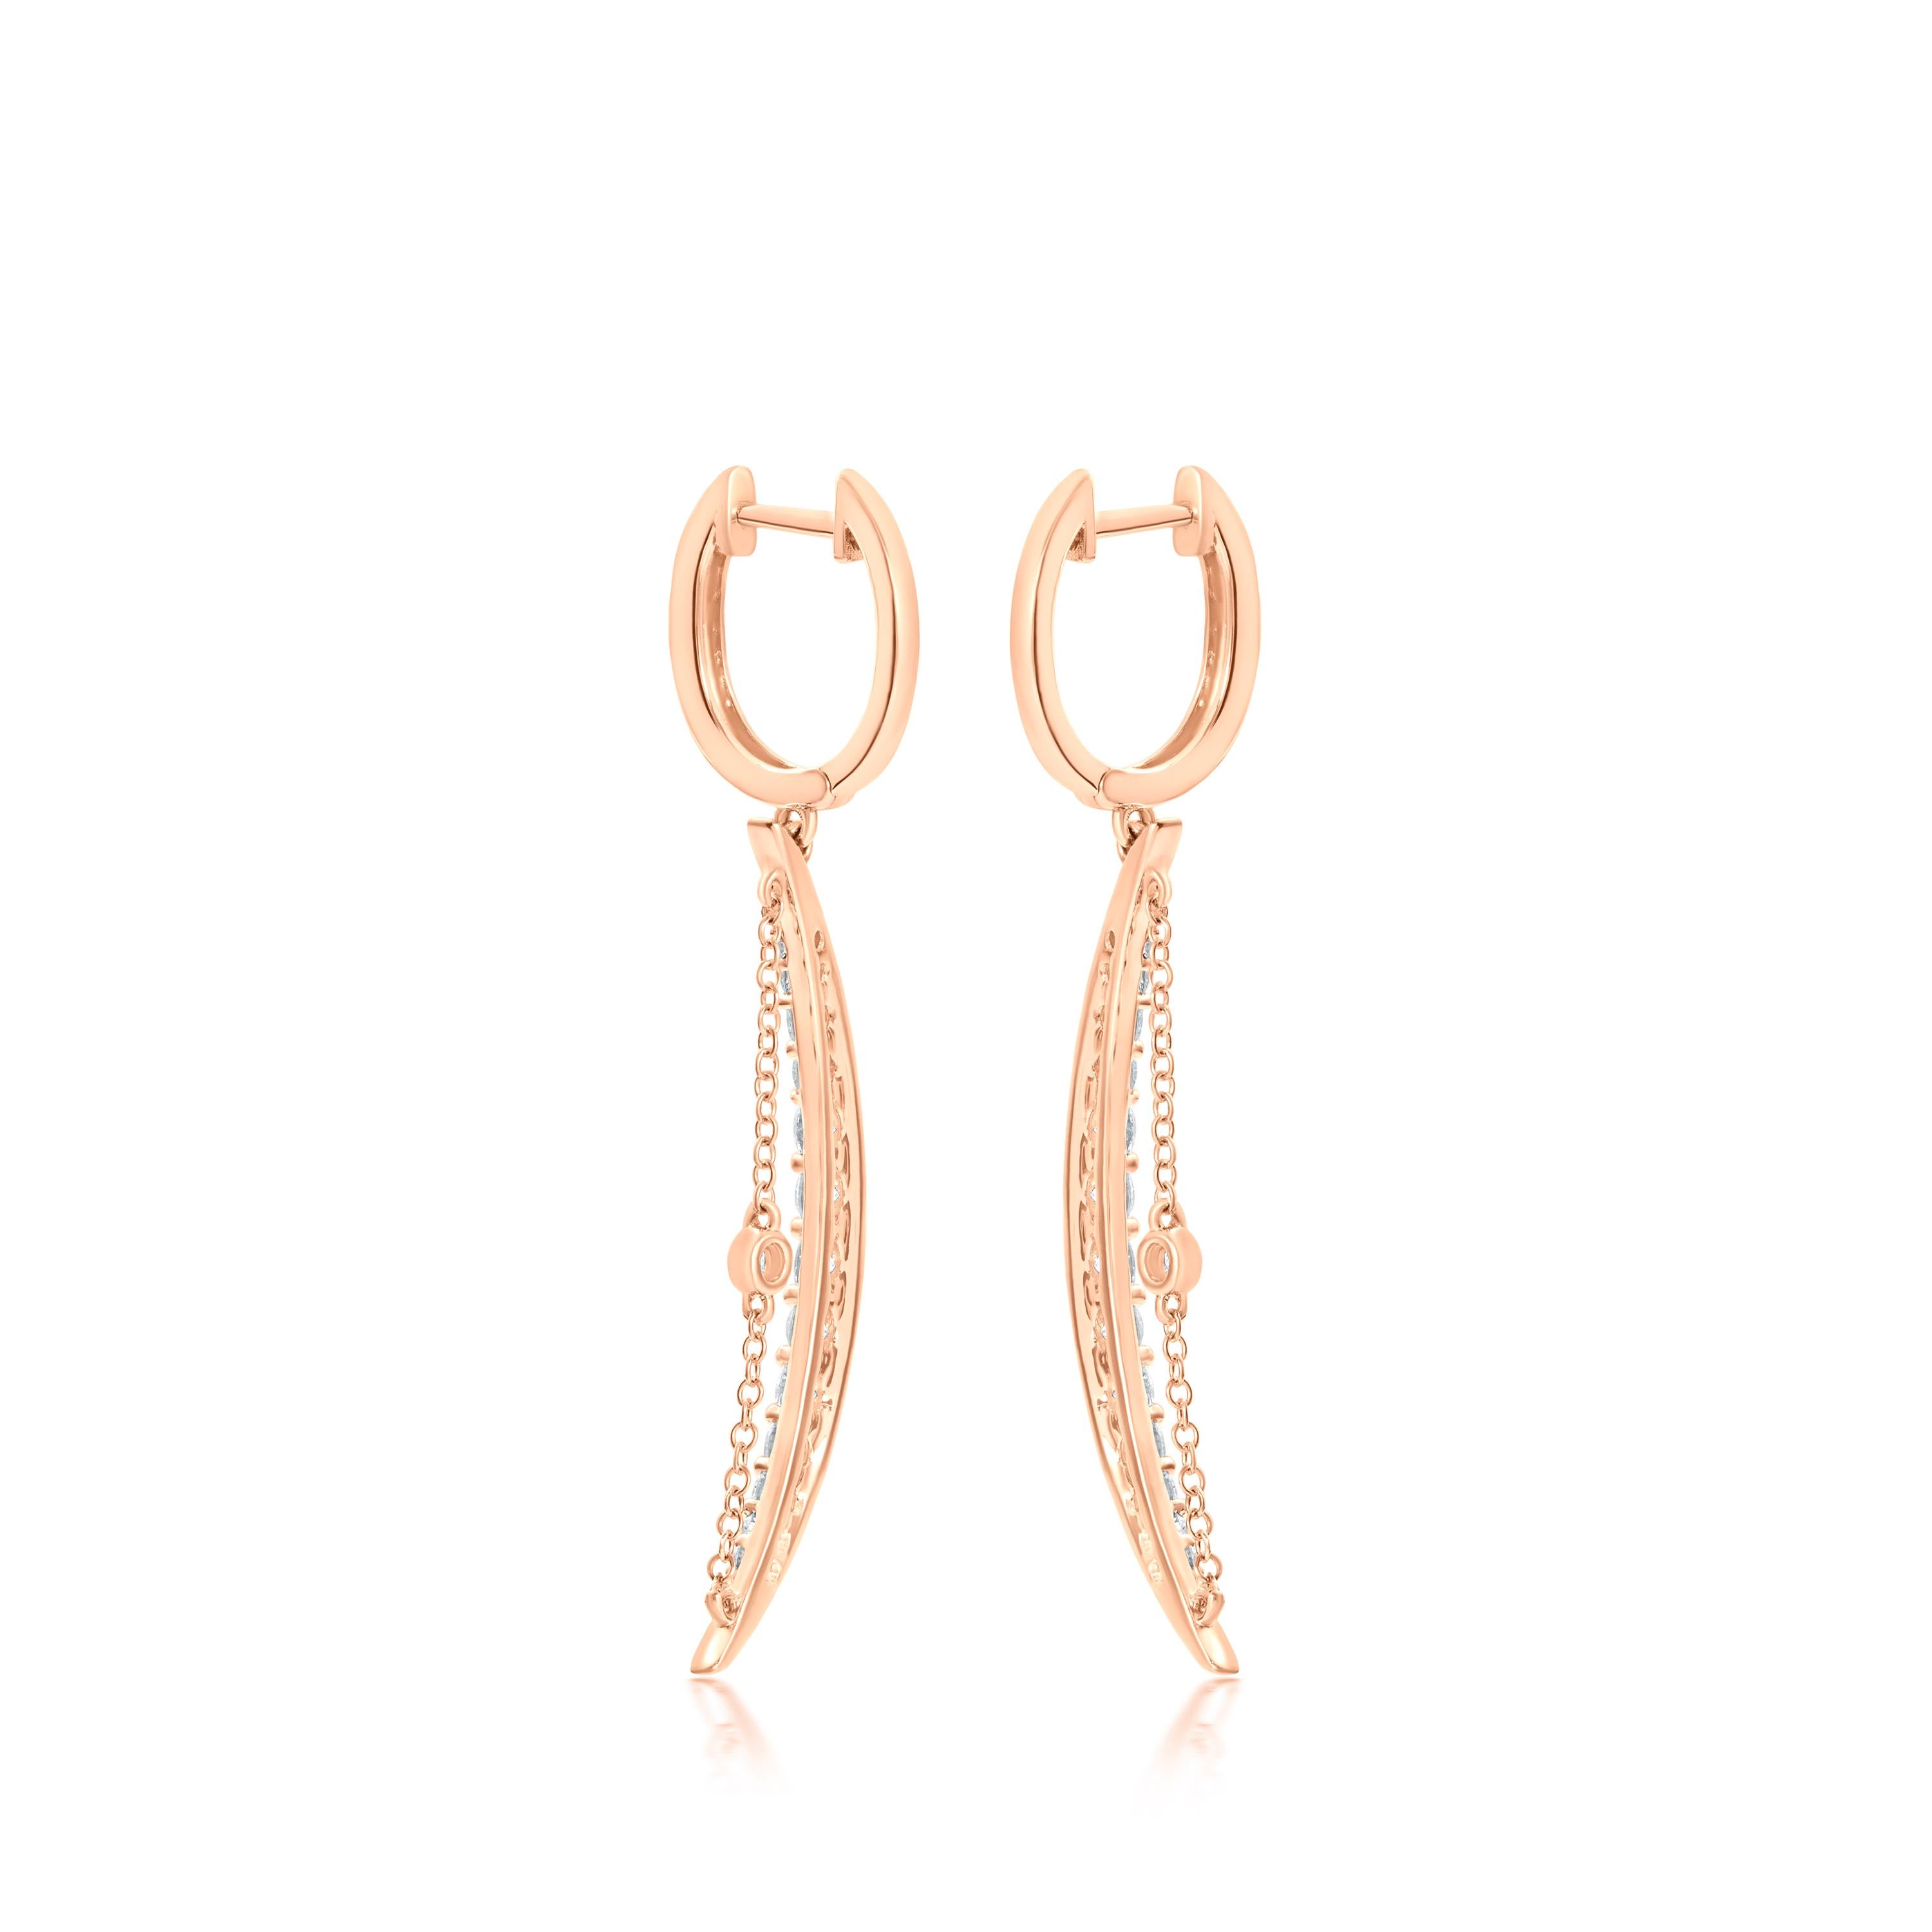 These Luxle crescent moon drop earrings made in 14k Rose Gold, which were designed with celestial inspiration in mind, glitter with 1.13 ct. t.w. of round diamonds in an attractive, classic motif with bezel set single diamond centered on delicate